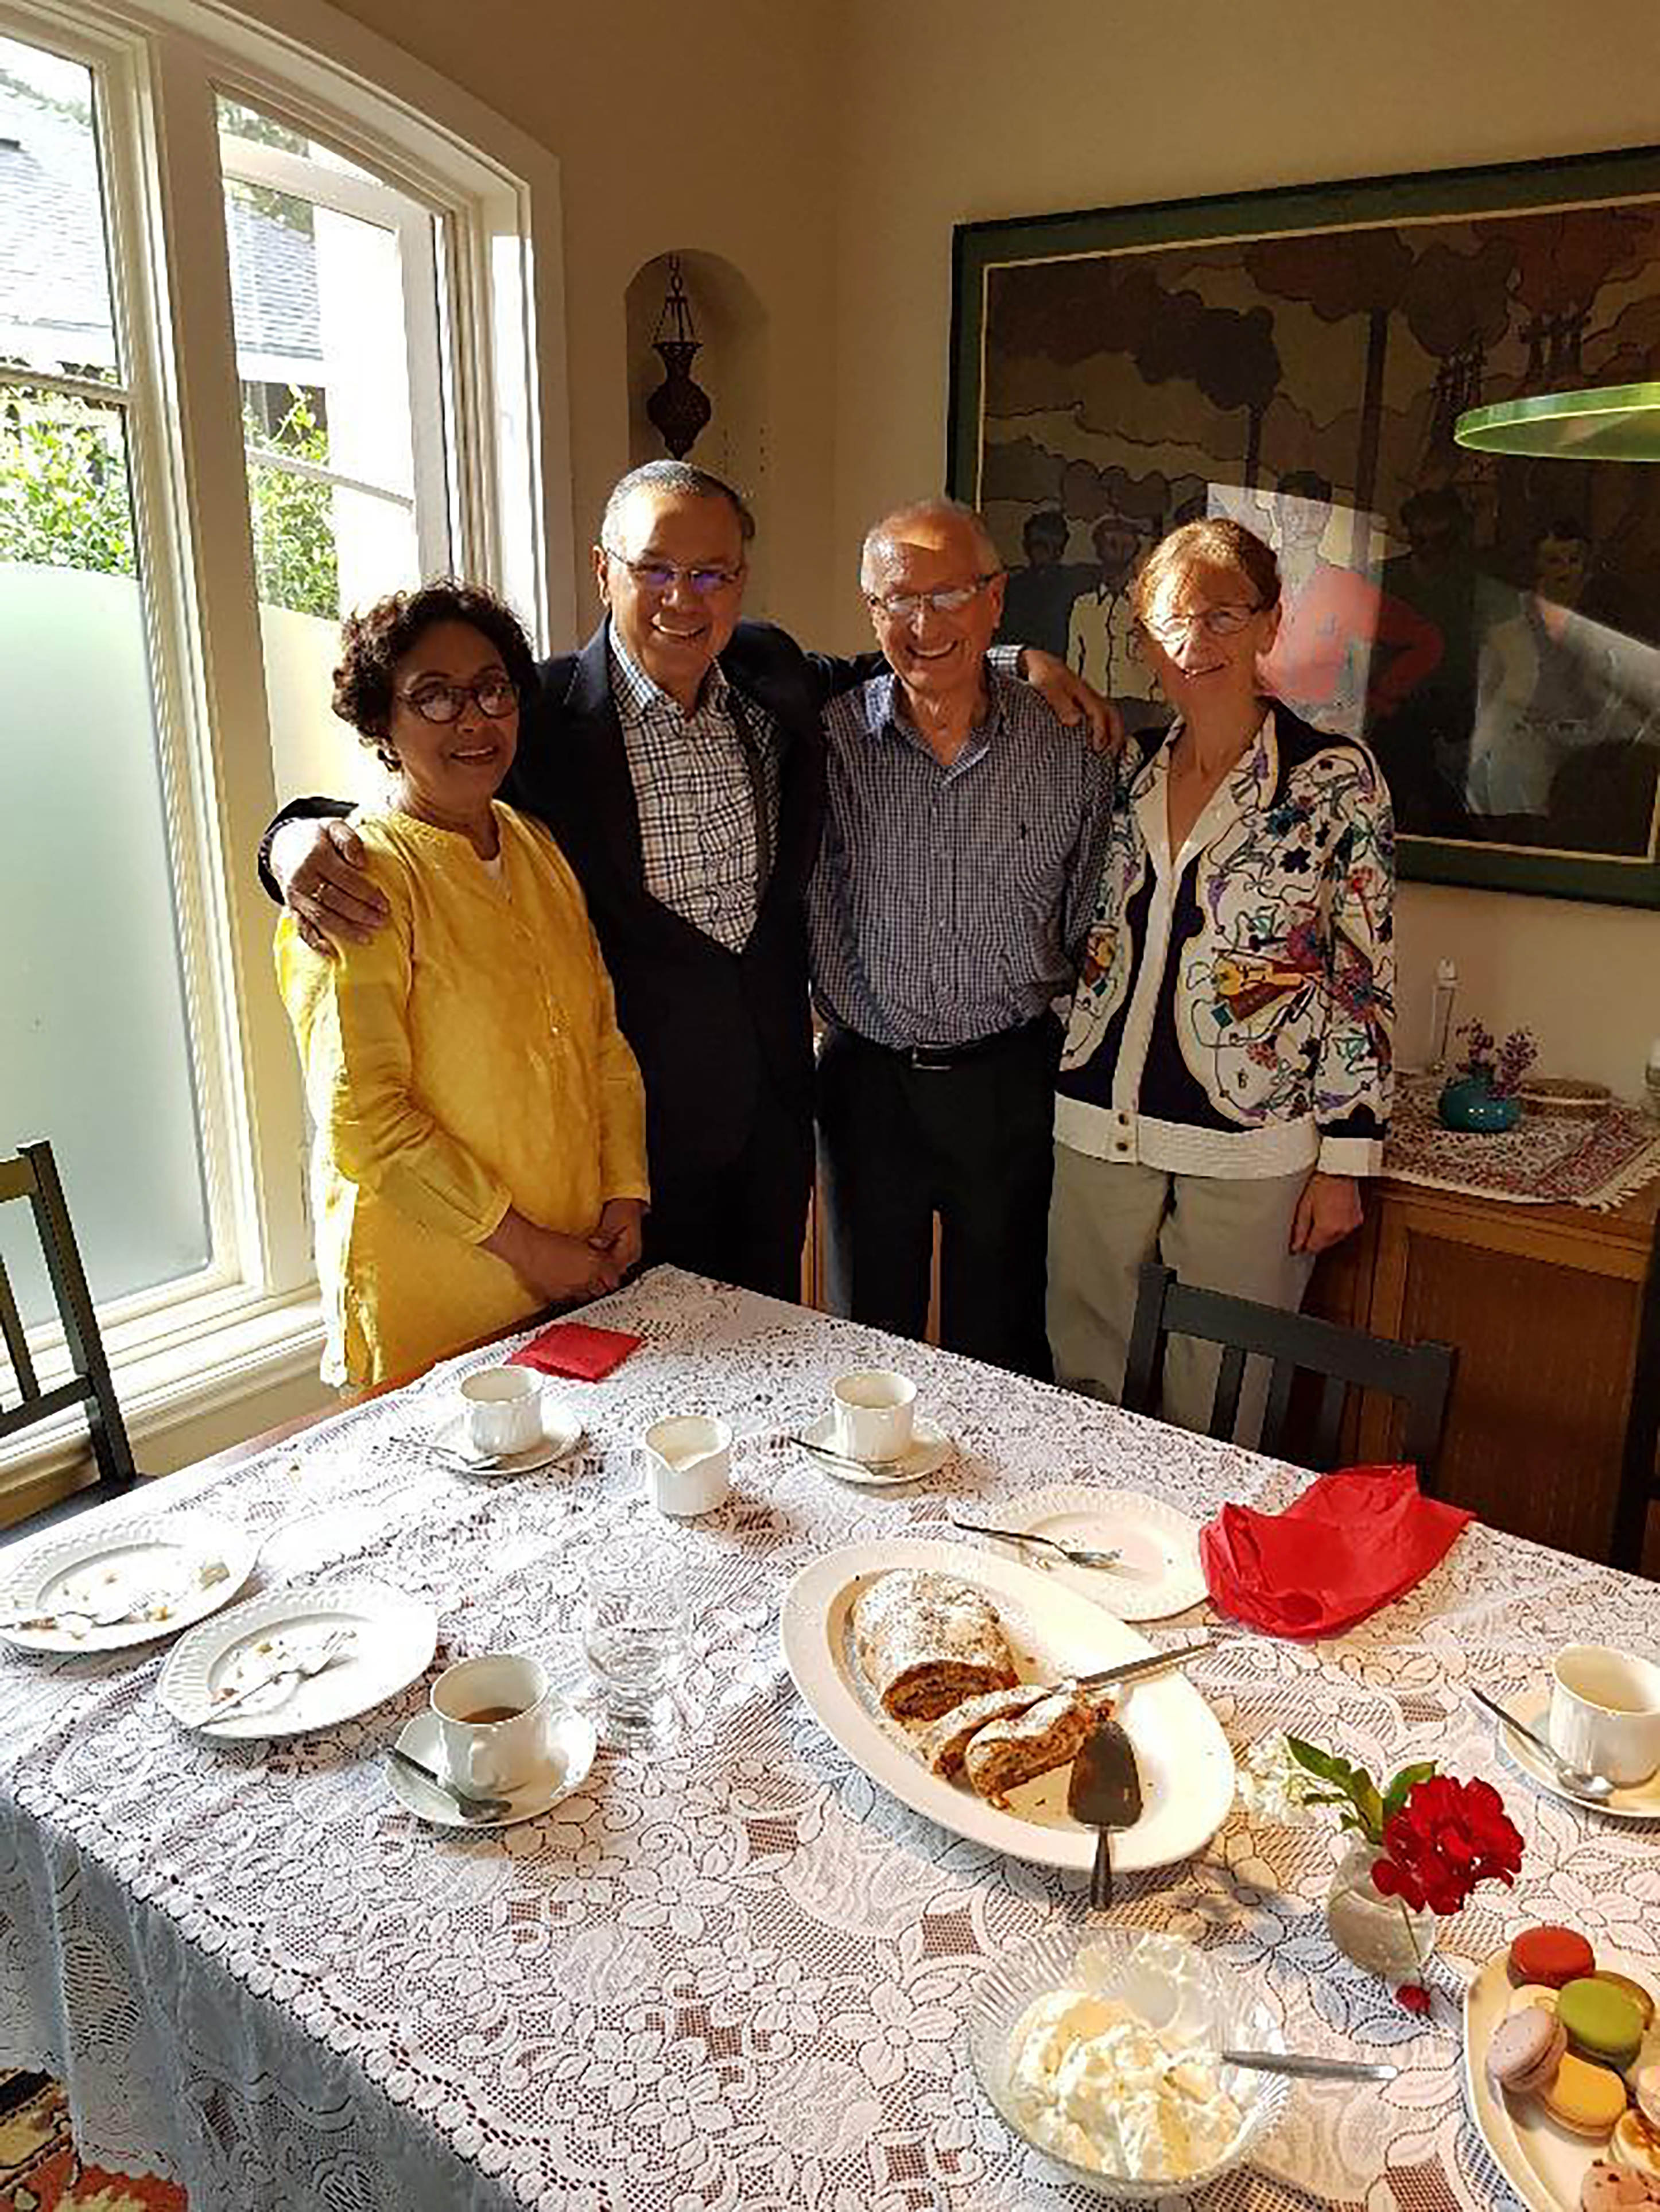 The group are standing around a table of food and empty dessert plates, there are cakes/sweets/cream in the middle. The room is sunshine yellow and there is a large window behind them.